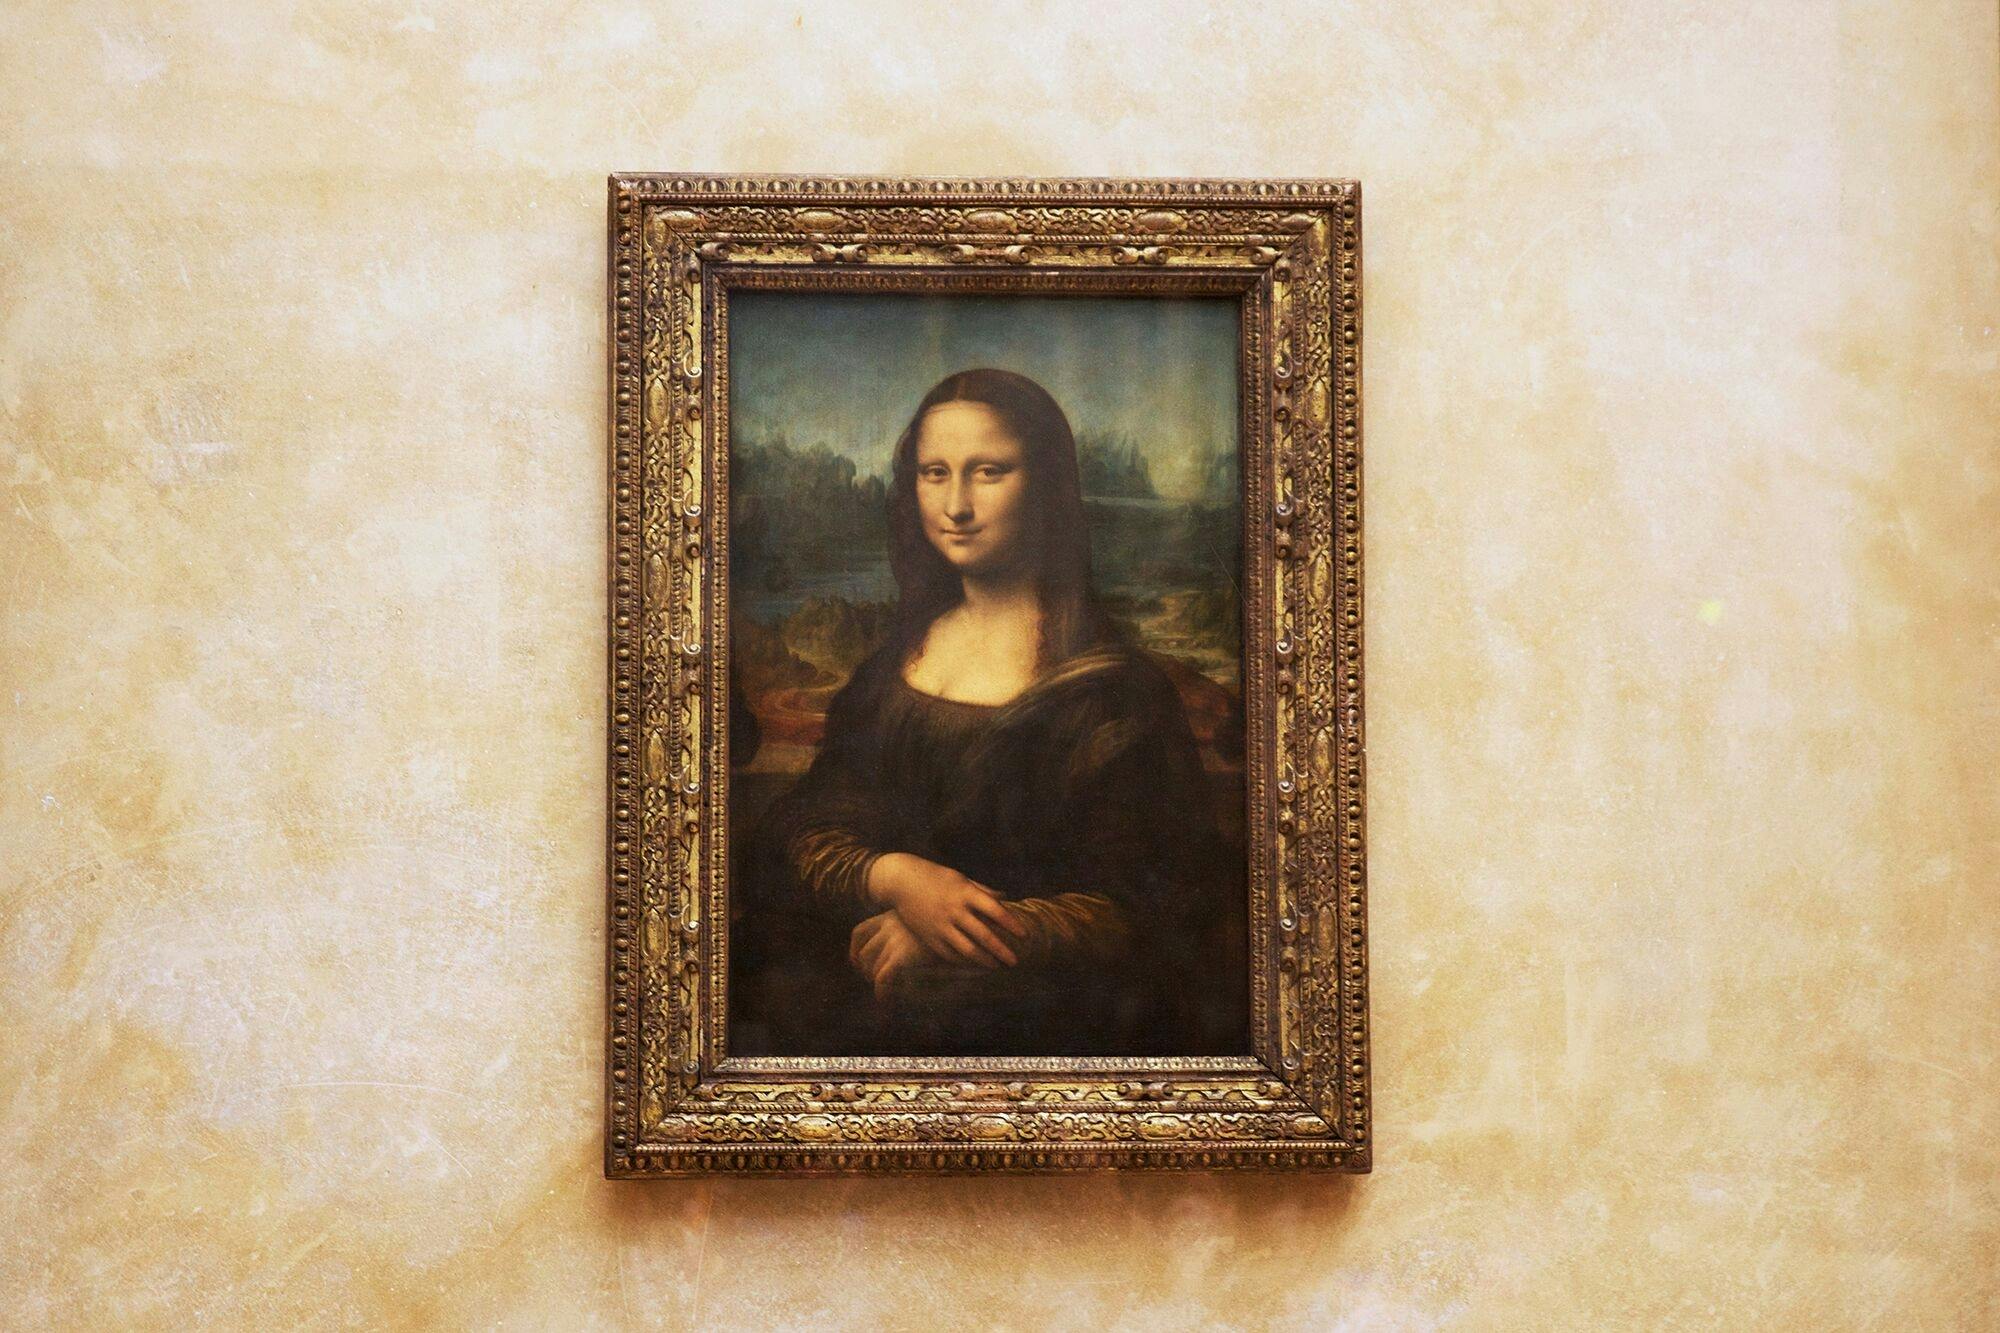 Alone with Mona Lisa, last entry Louvre tour